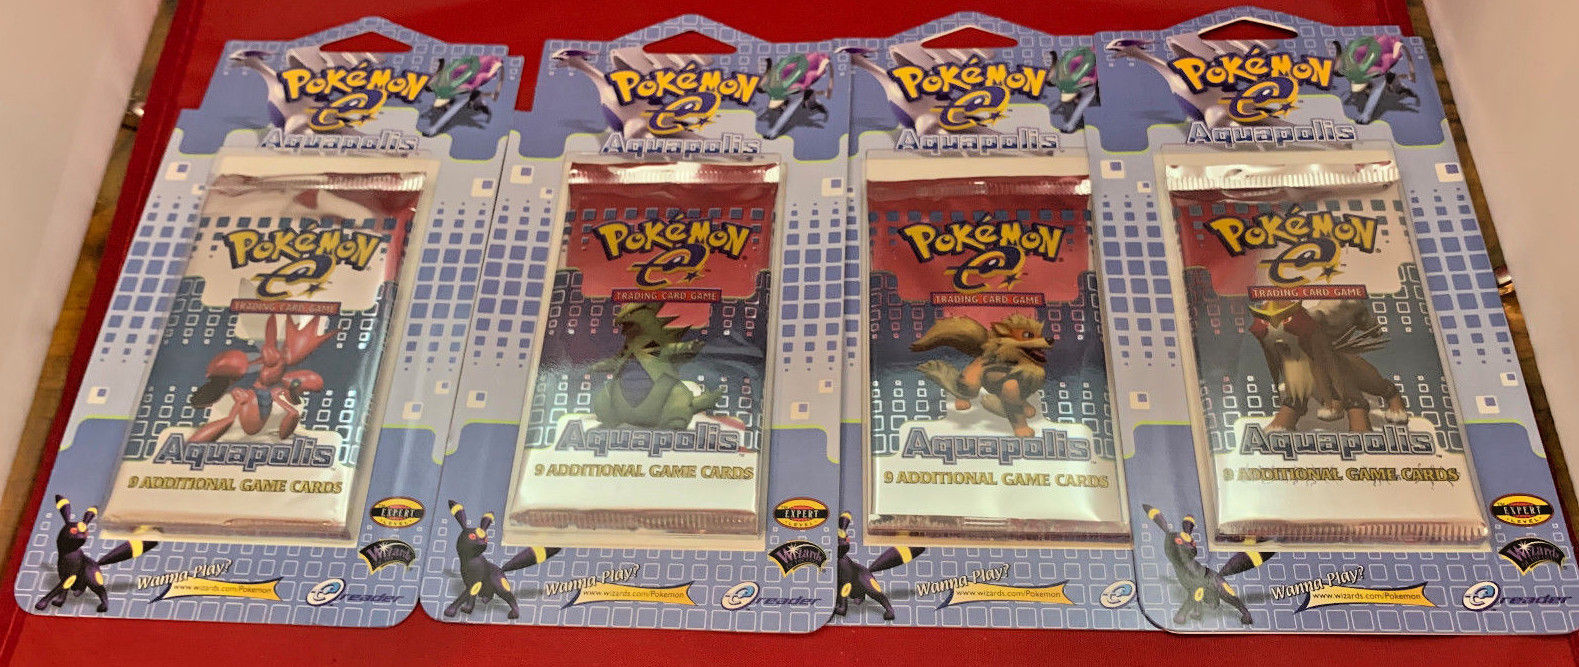 2003 Pokemon Aquapolis Booster Blister Pack SET-Factory Sealed. Extremely Rare.